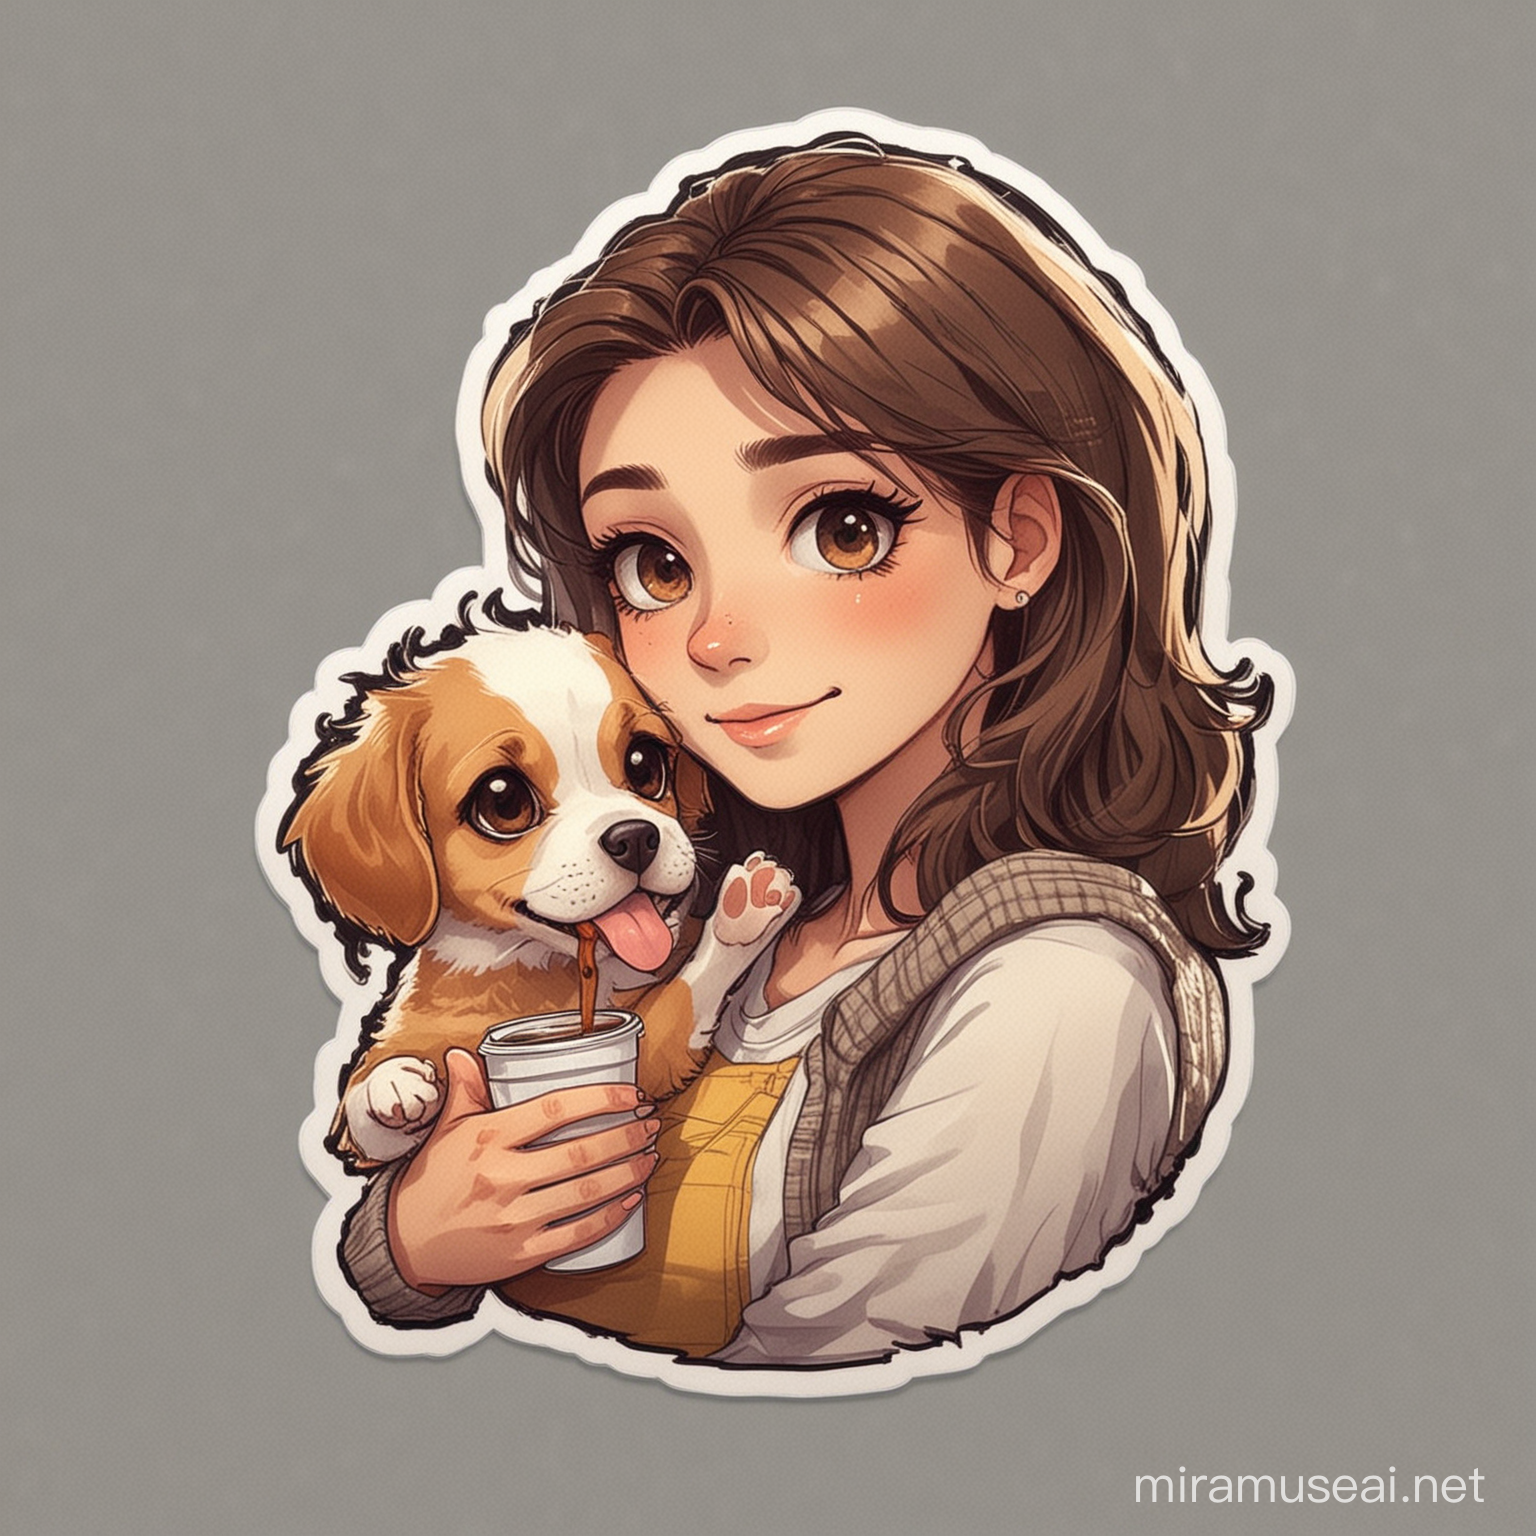 I want a sticker with a girl holding a coffee cup with her per dog next to her The image should be in the sticker format